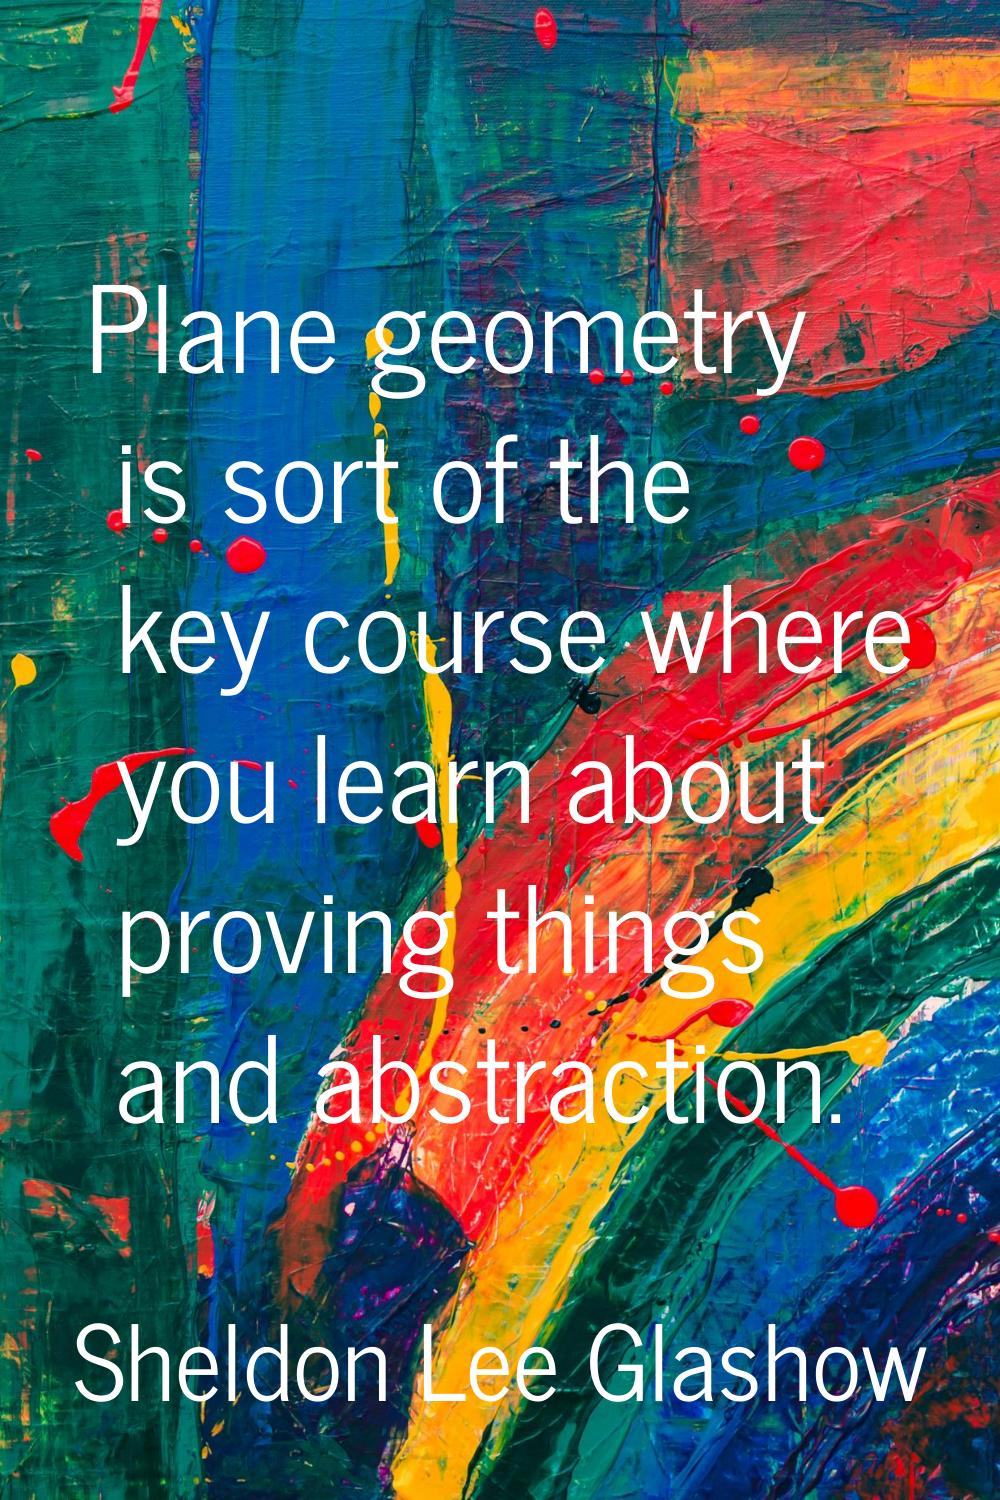 Plane geometry is sort of the key course where you learn about proving things and abstraction.